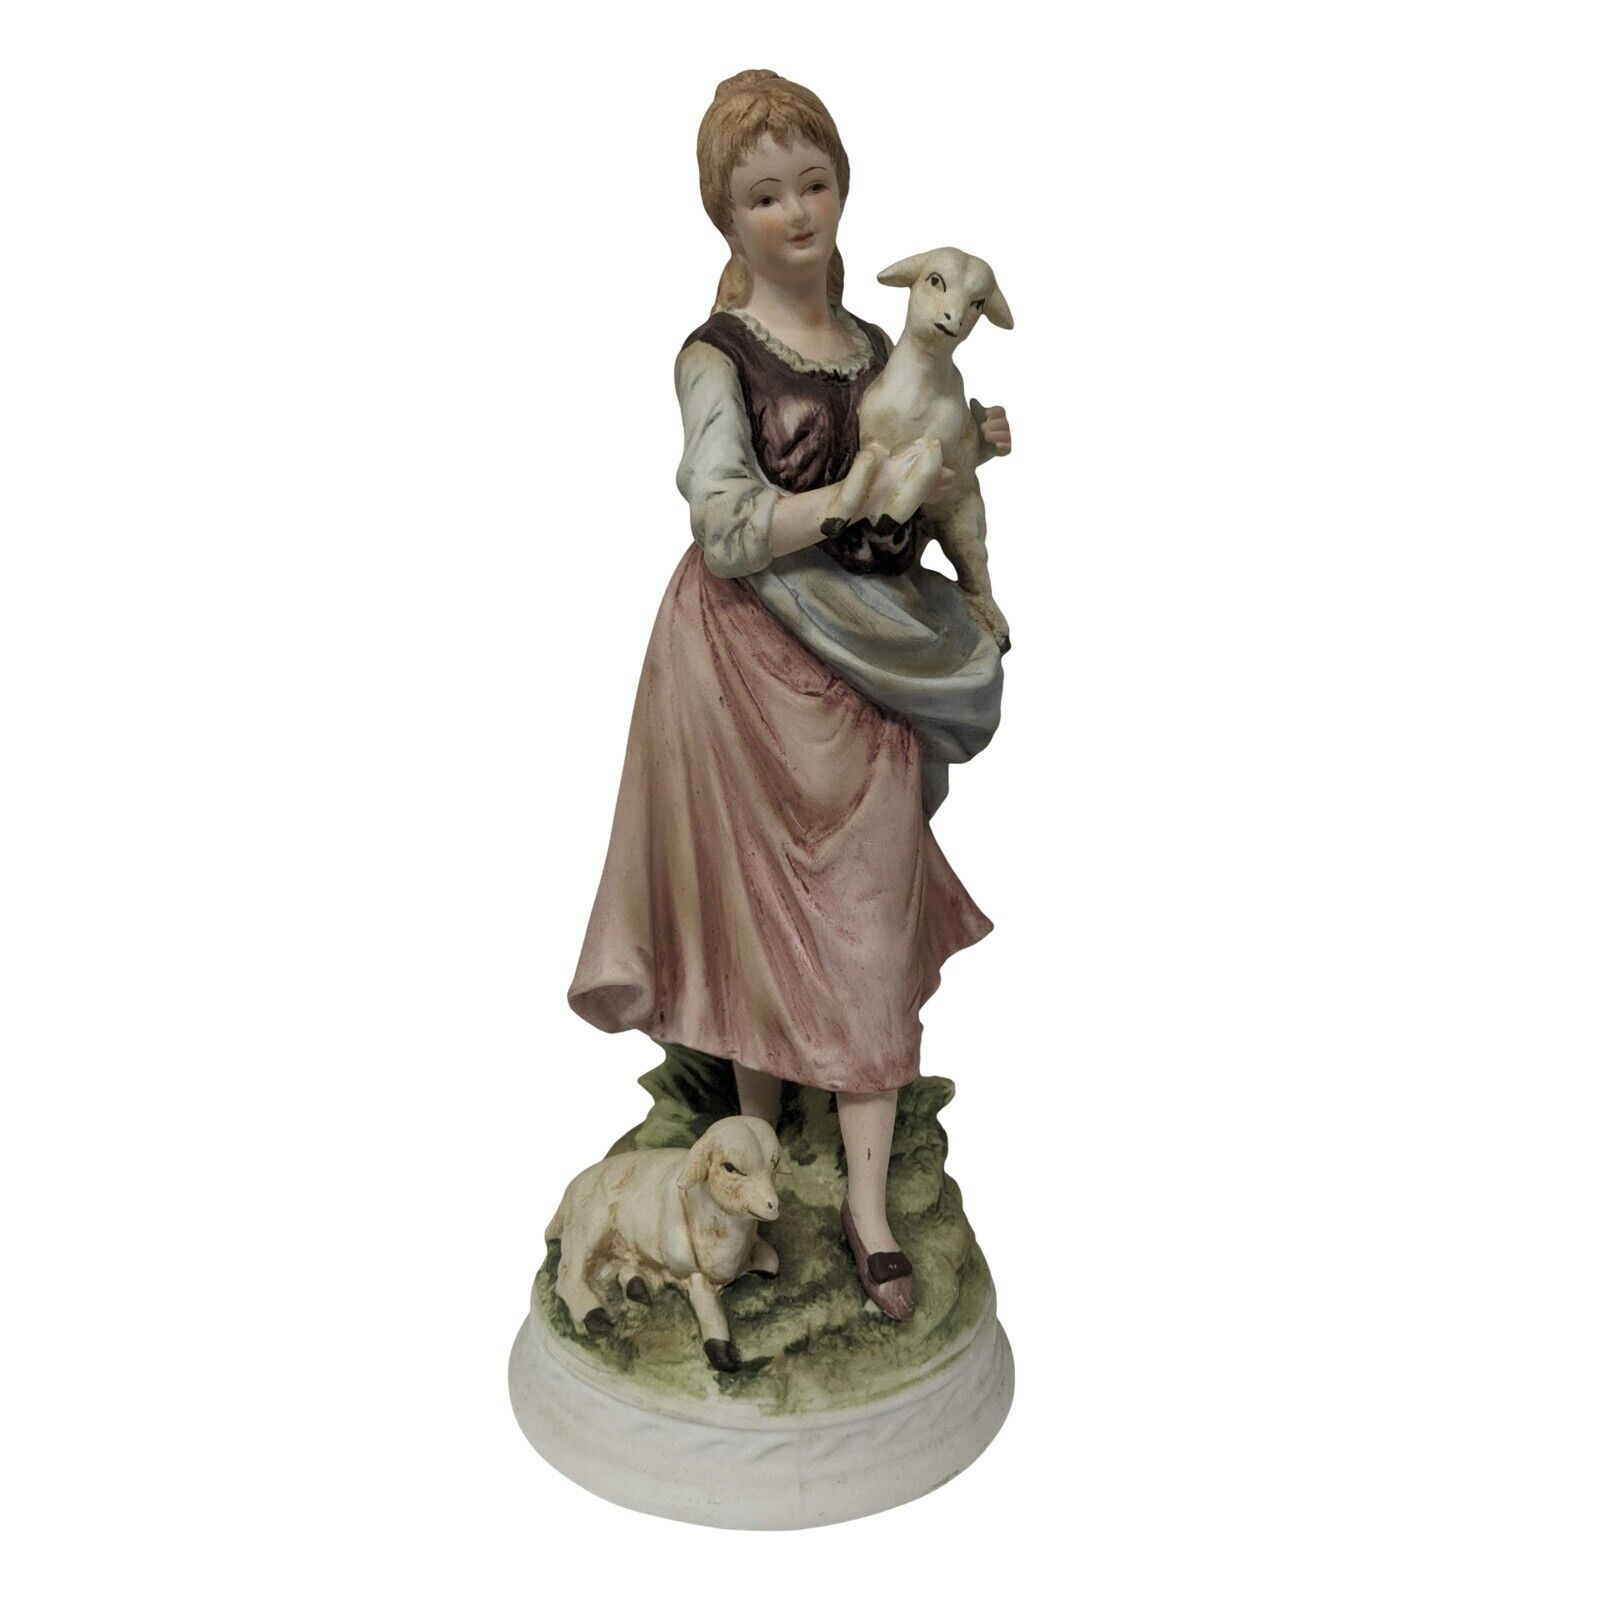 Vintage Lady Girl With Two Lambs Figurine  by Andrea By Sadek #7553 #704